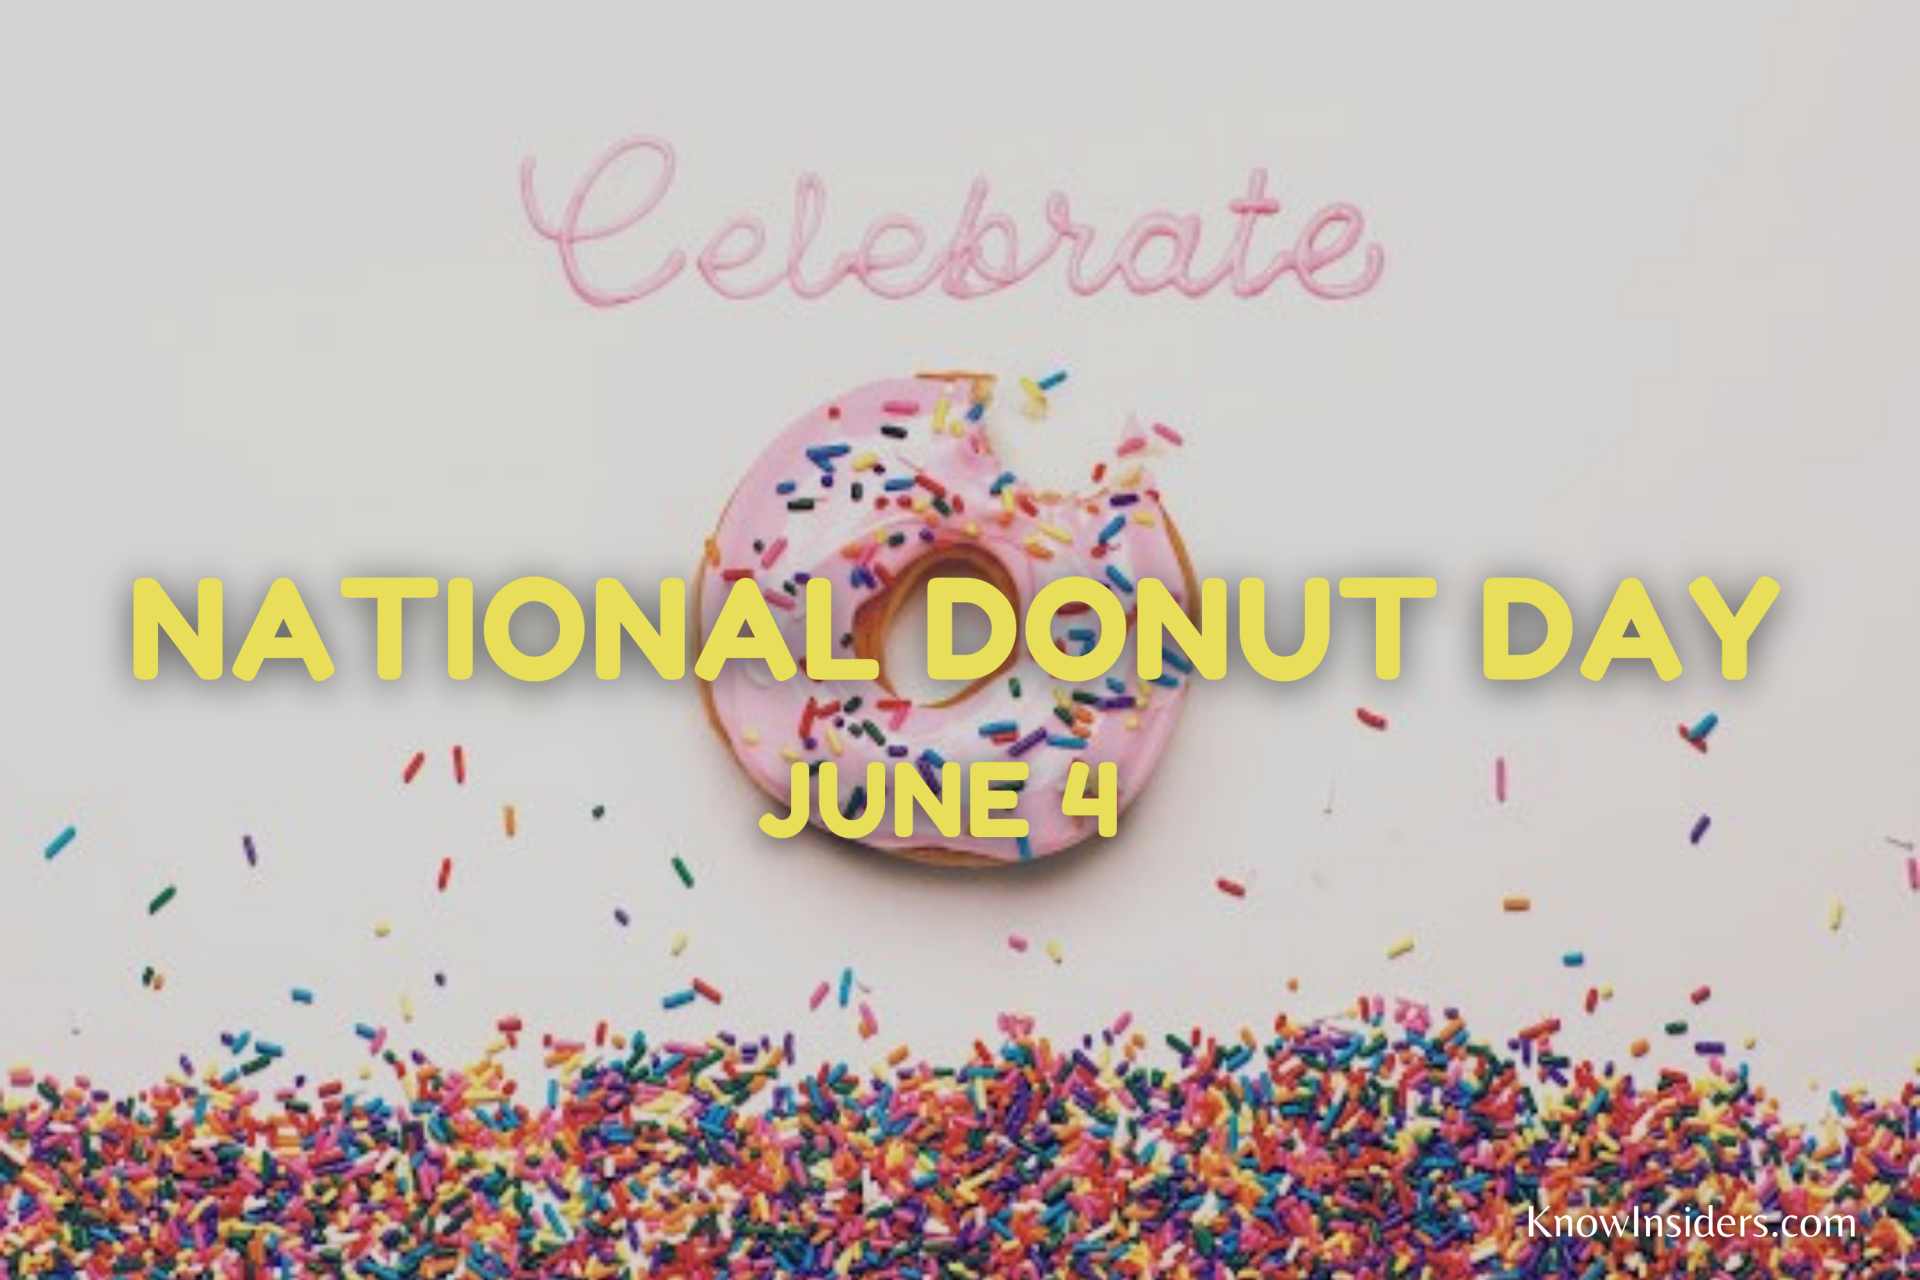 National Donut Day How to get a Free Donut, History, Significance and